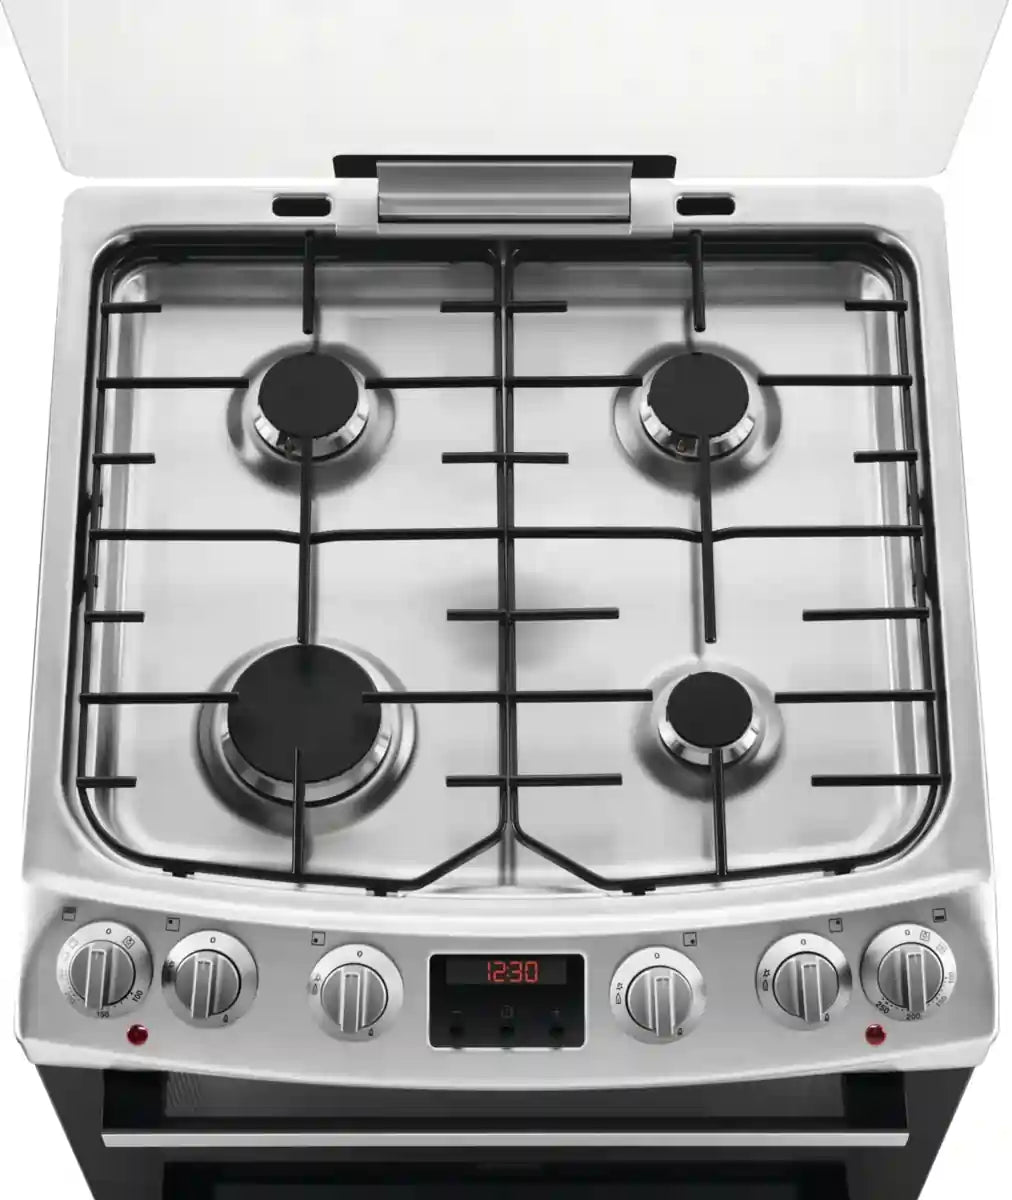 Zanussi ZCK66350XA 60 cm Double Oven, Glass Lid, A Rating Dual Fuel Cooker - Stainless Steel - Atlantic Electrics